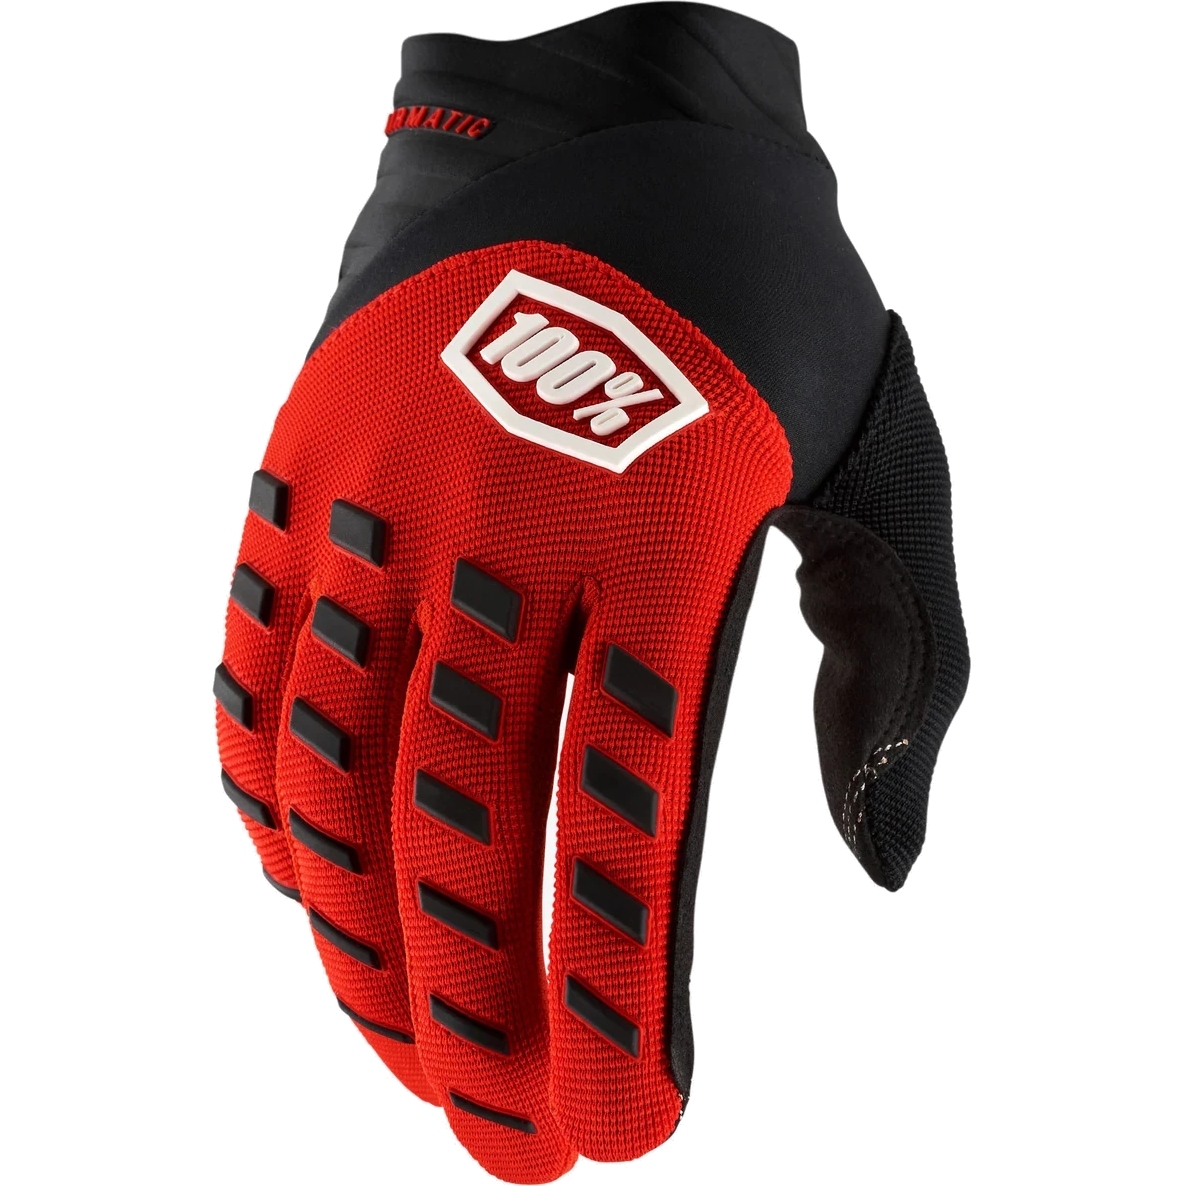 Image of 100% Airmatic Bike Gloves - red/black